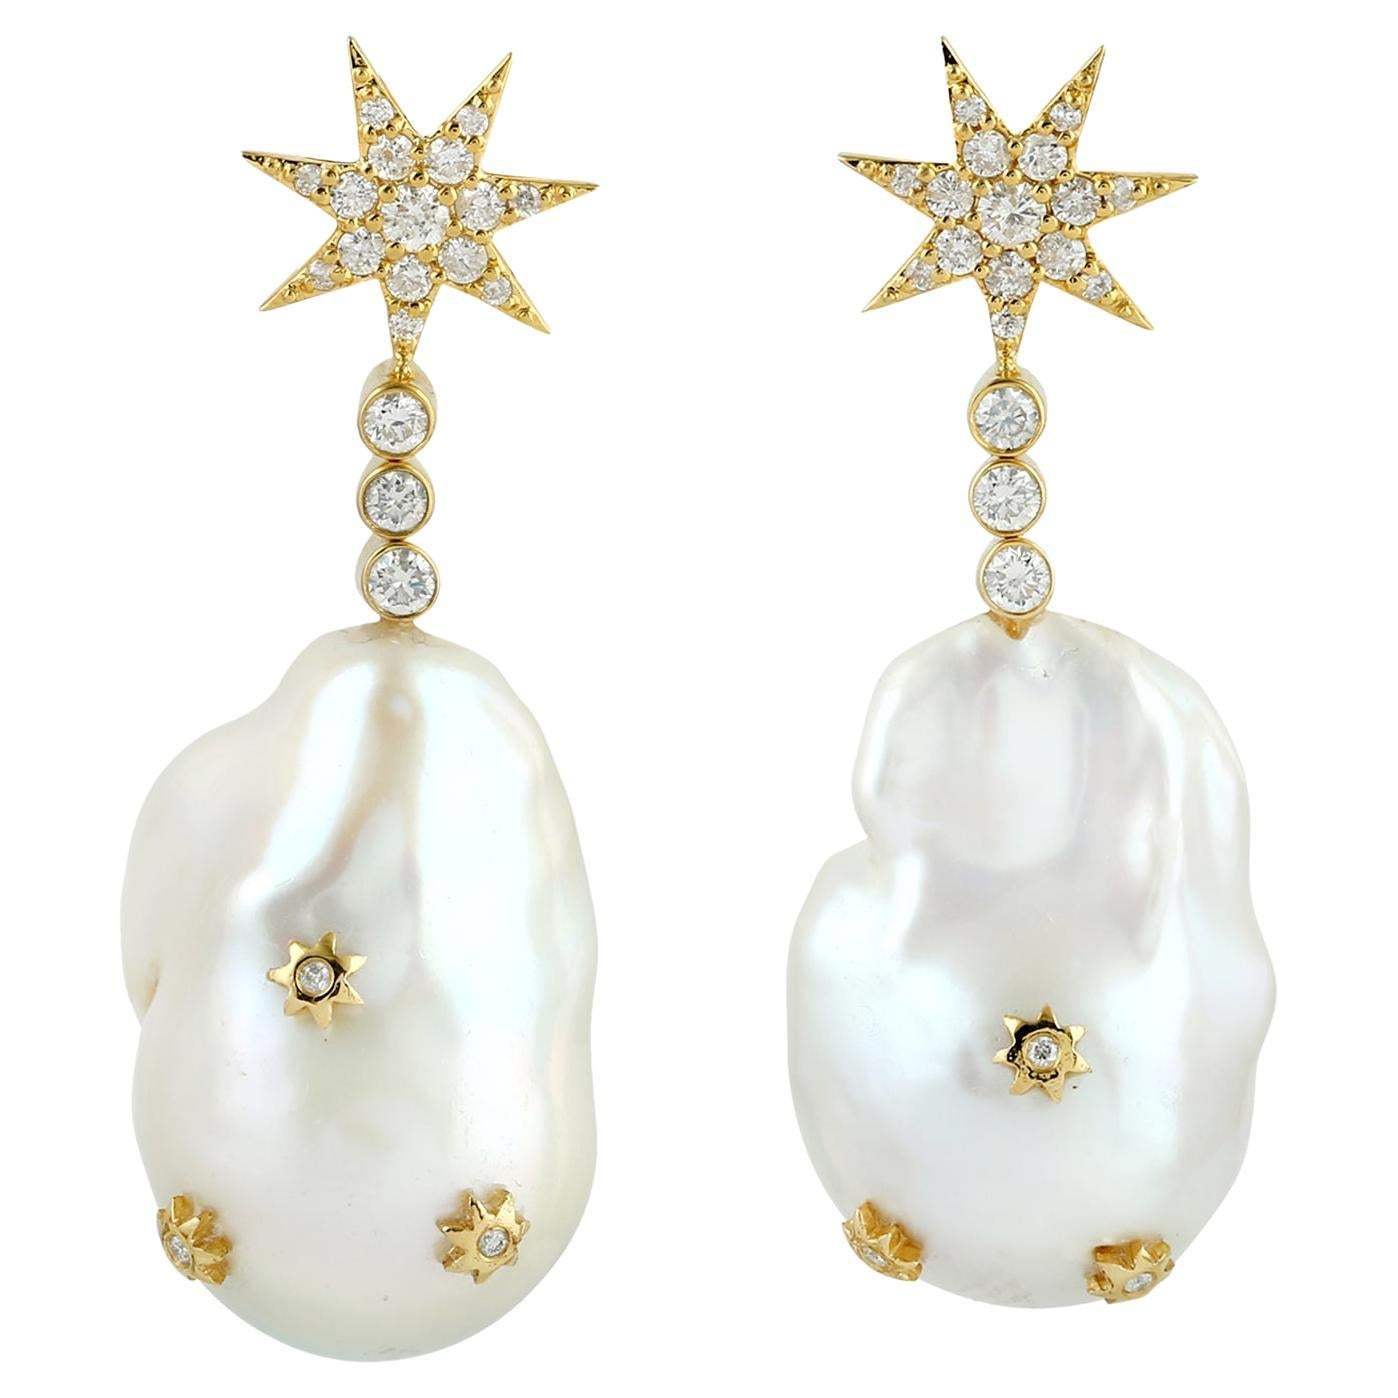 Starburst Dangle Earrring With Baroque Pearl & Diamonds In 18k Yellow Gold For Sale